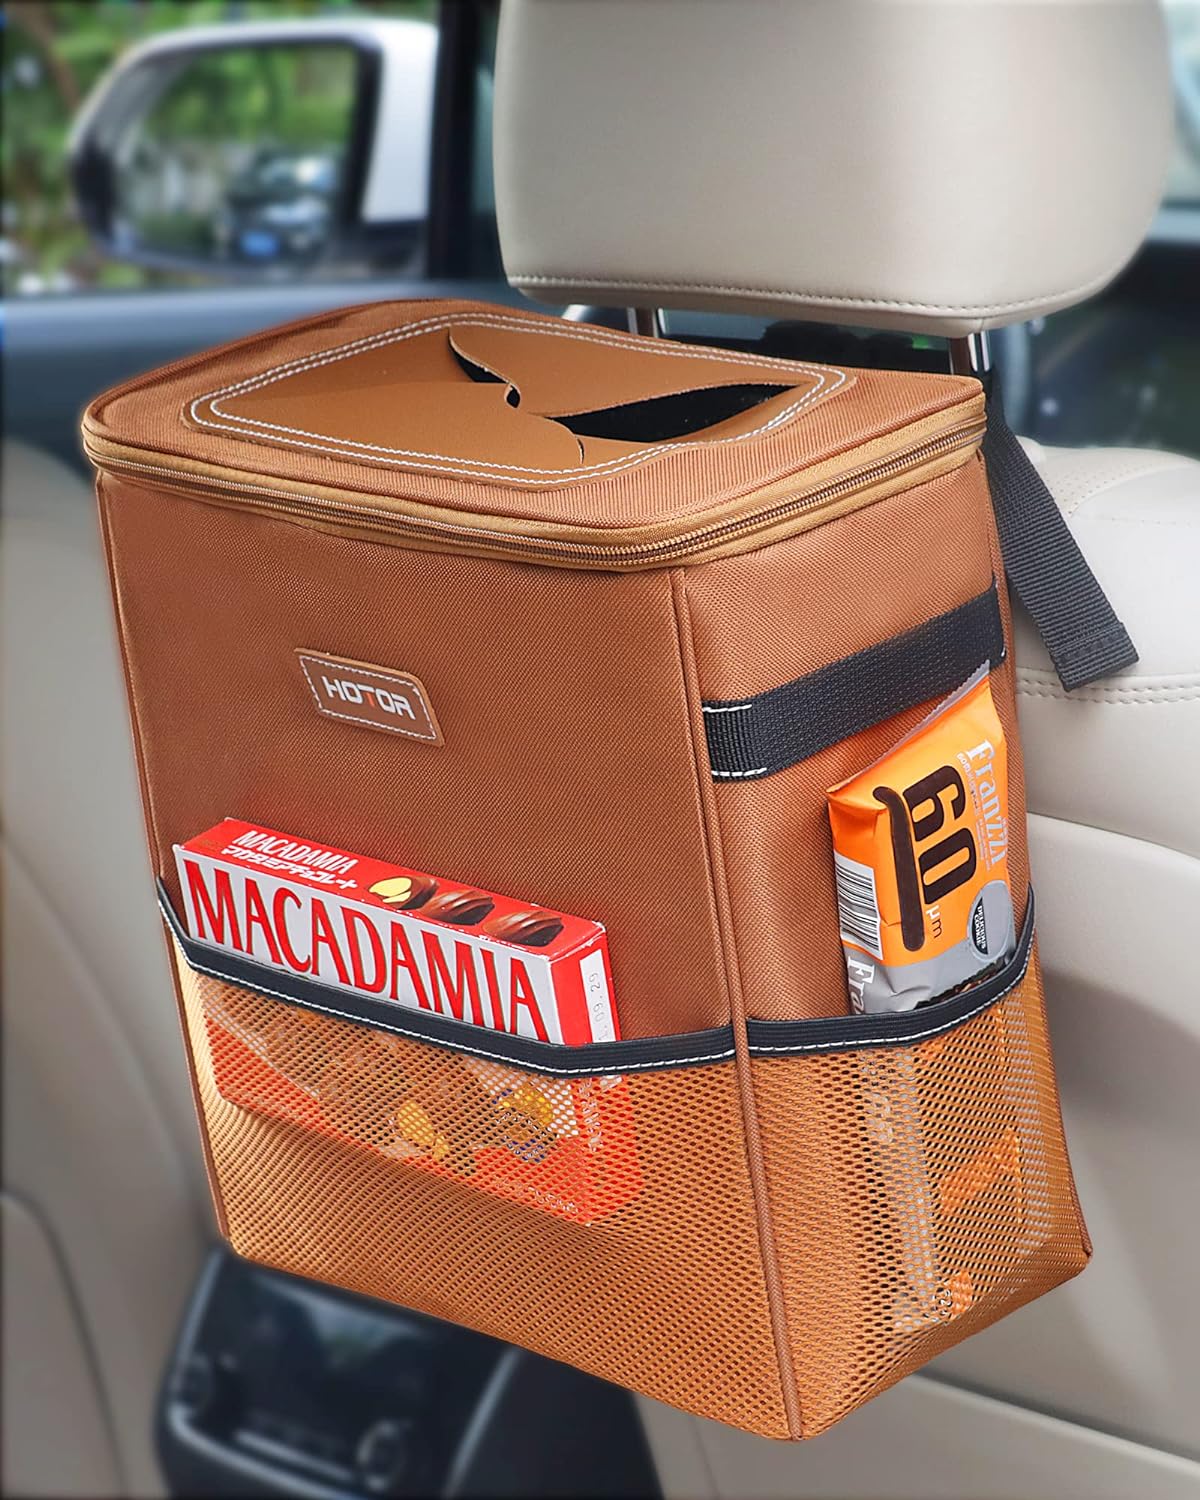 HOTOR Car Trash Can, 3-Gallon Ultra-Large Car Garbage Can, 100% Leakproof & Waterproof Trash Can for Car, Multipurpose Car Trash Bin with Adjustable Straps, Magnetic Buckles, Mesh Pockets (Brown)